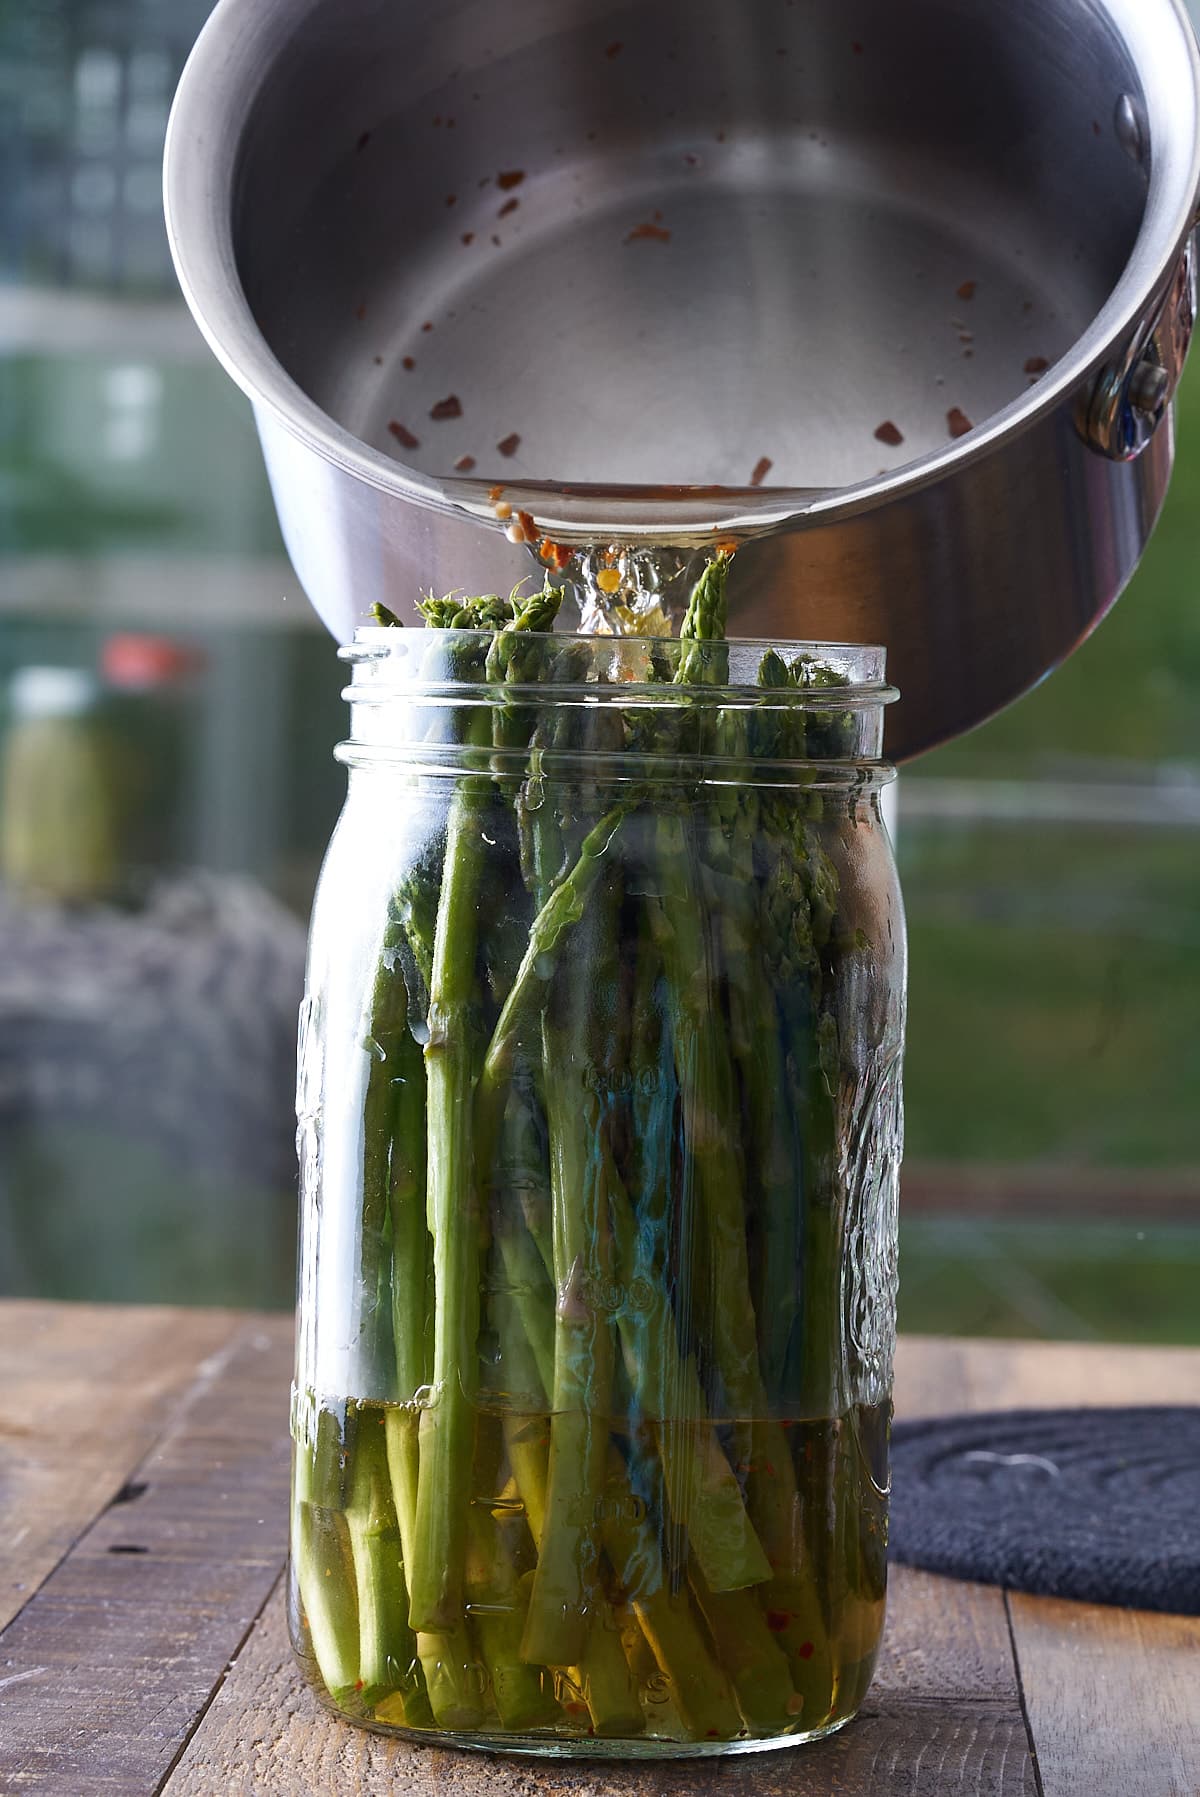 Asparagus spears set upright in a glass mason jar being topped up with pickling liquid.